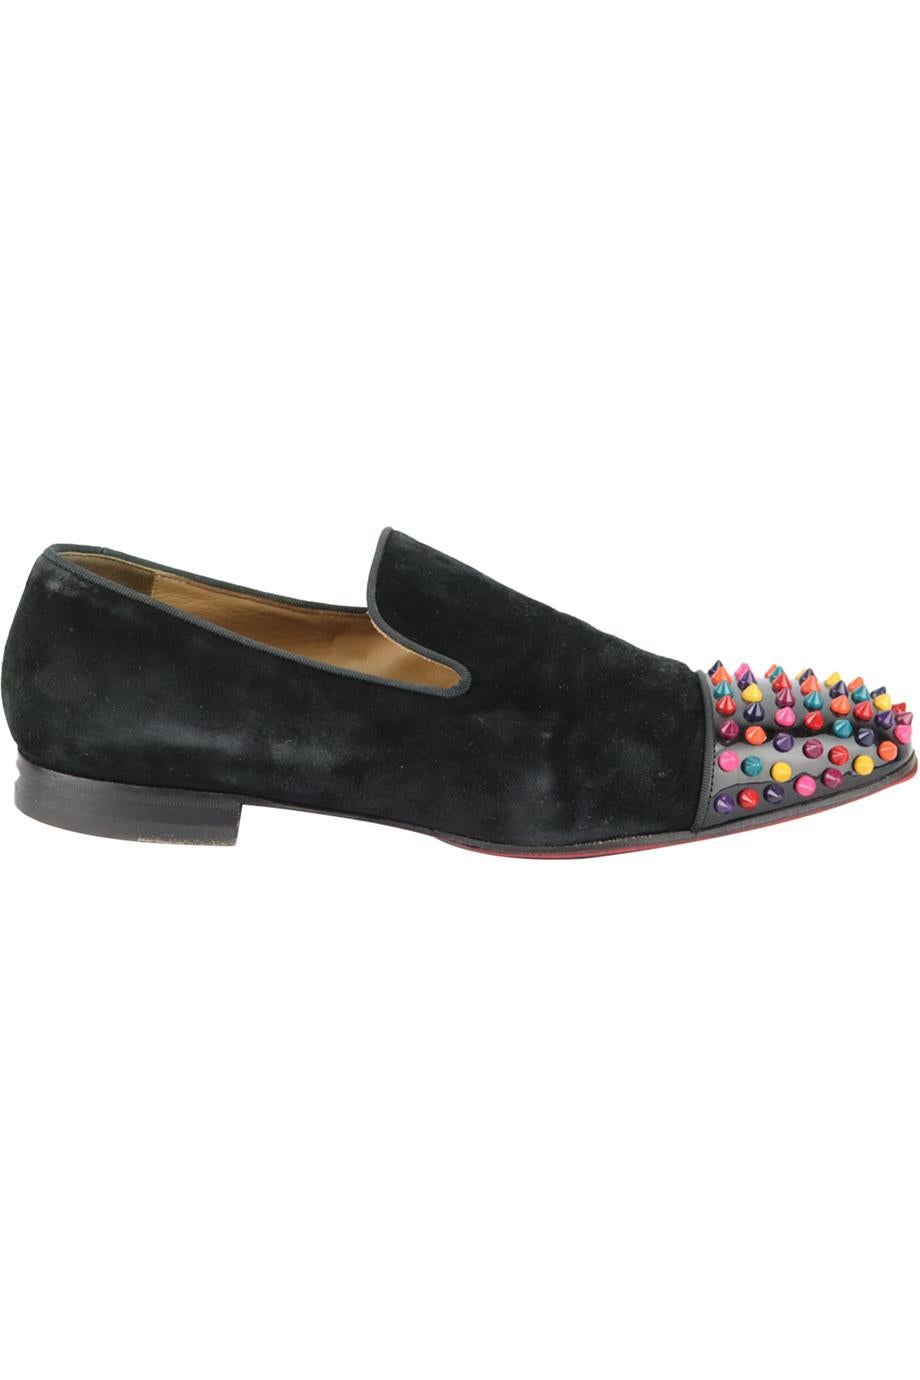 Christian Louboutin Spooky spiked suede loafers. Made from black suede with multi-coloured spikes set on a black patent-leather toe cap and the brand’s iconic red sole. Black. Slip on. Does not come with box or dustbag. Size: EU 44 (UK 10, US 11).